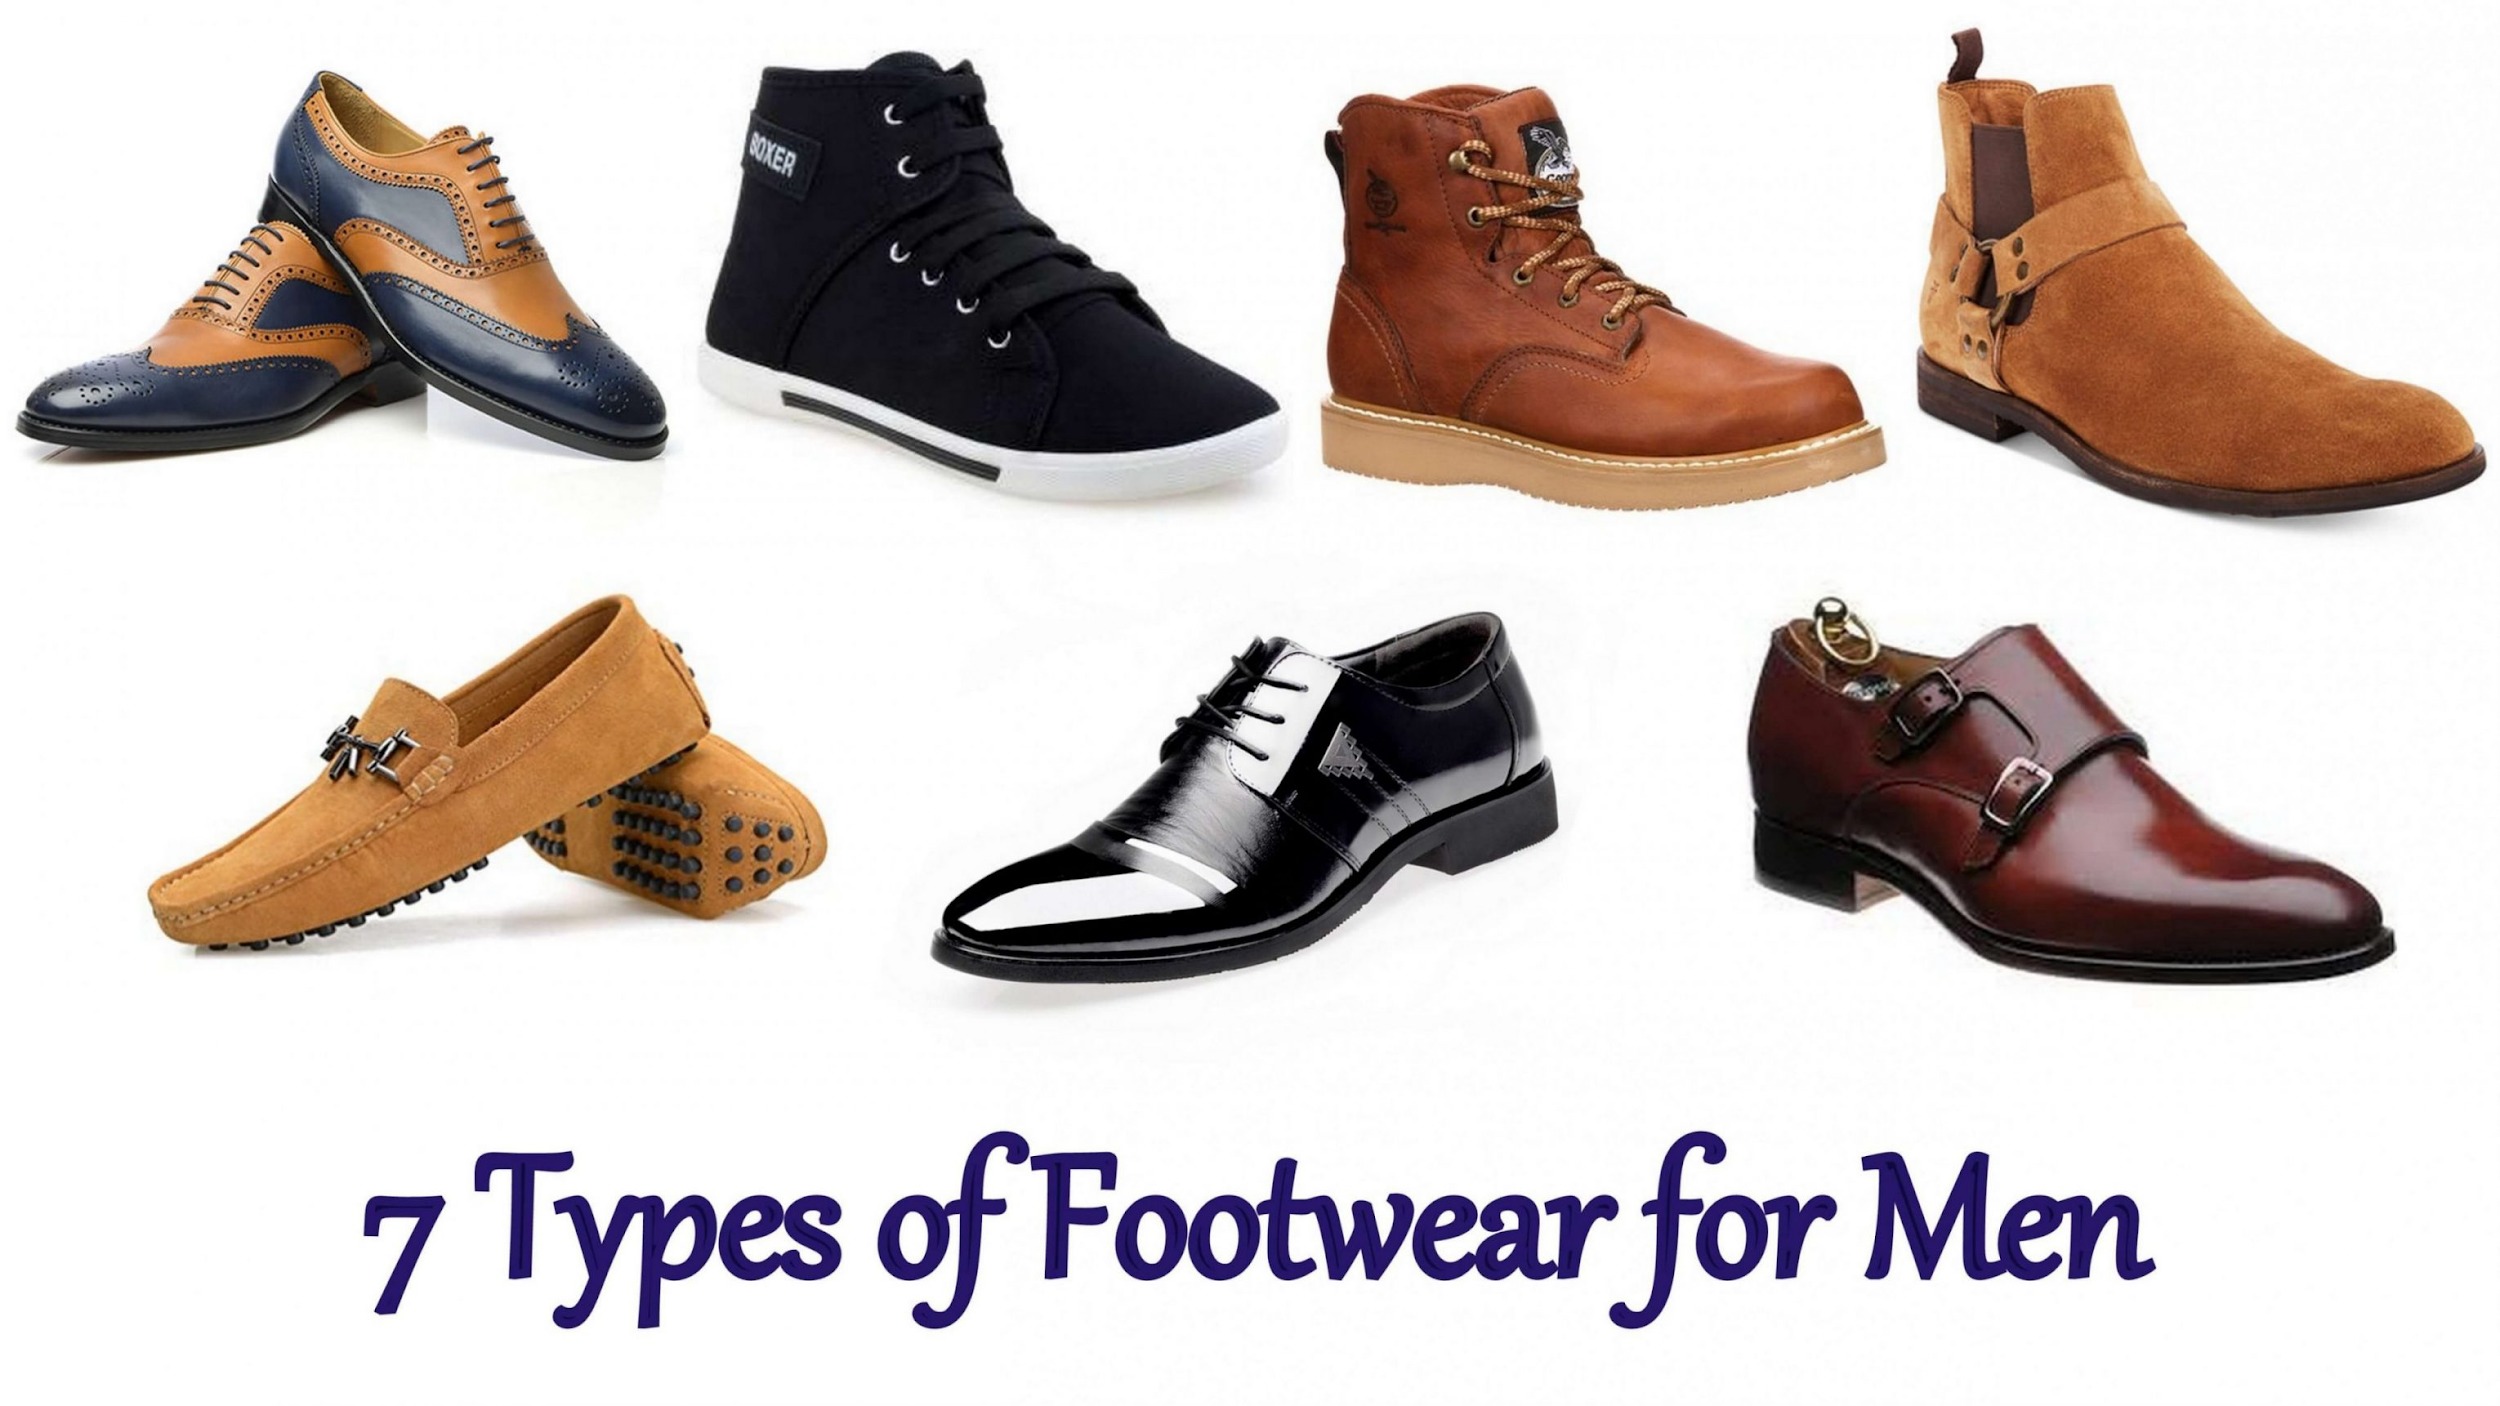 7 Types of Footwear for Men | Previous Magazine